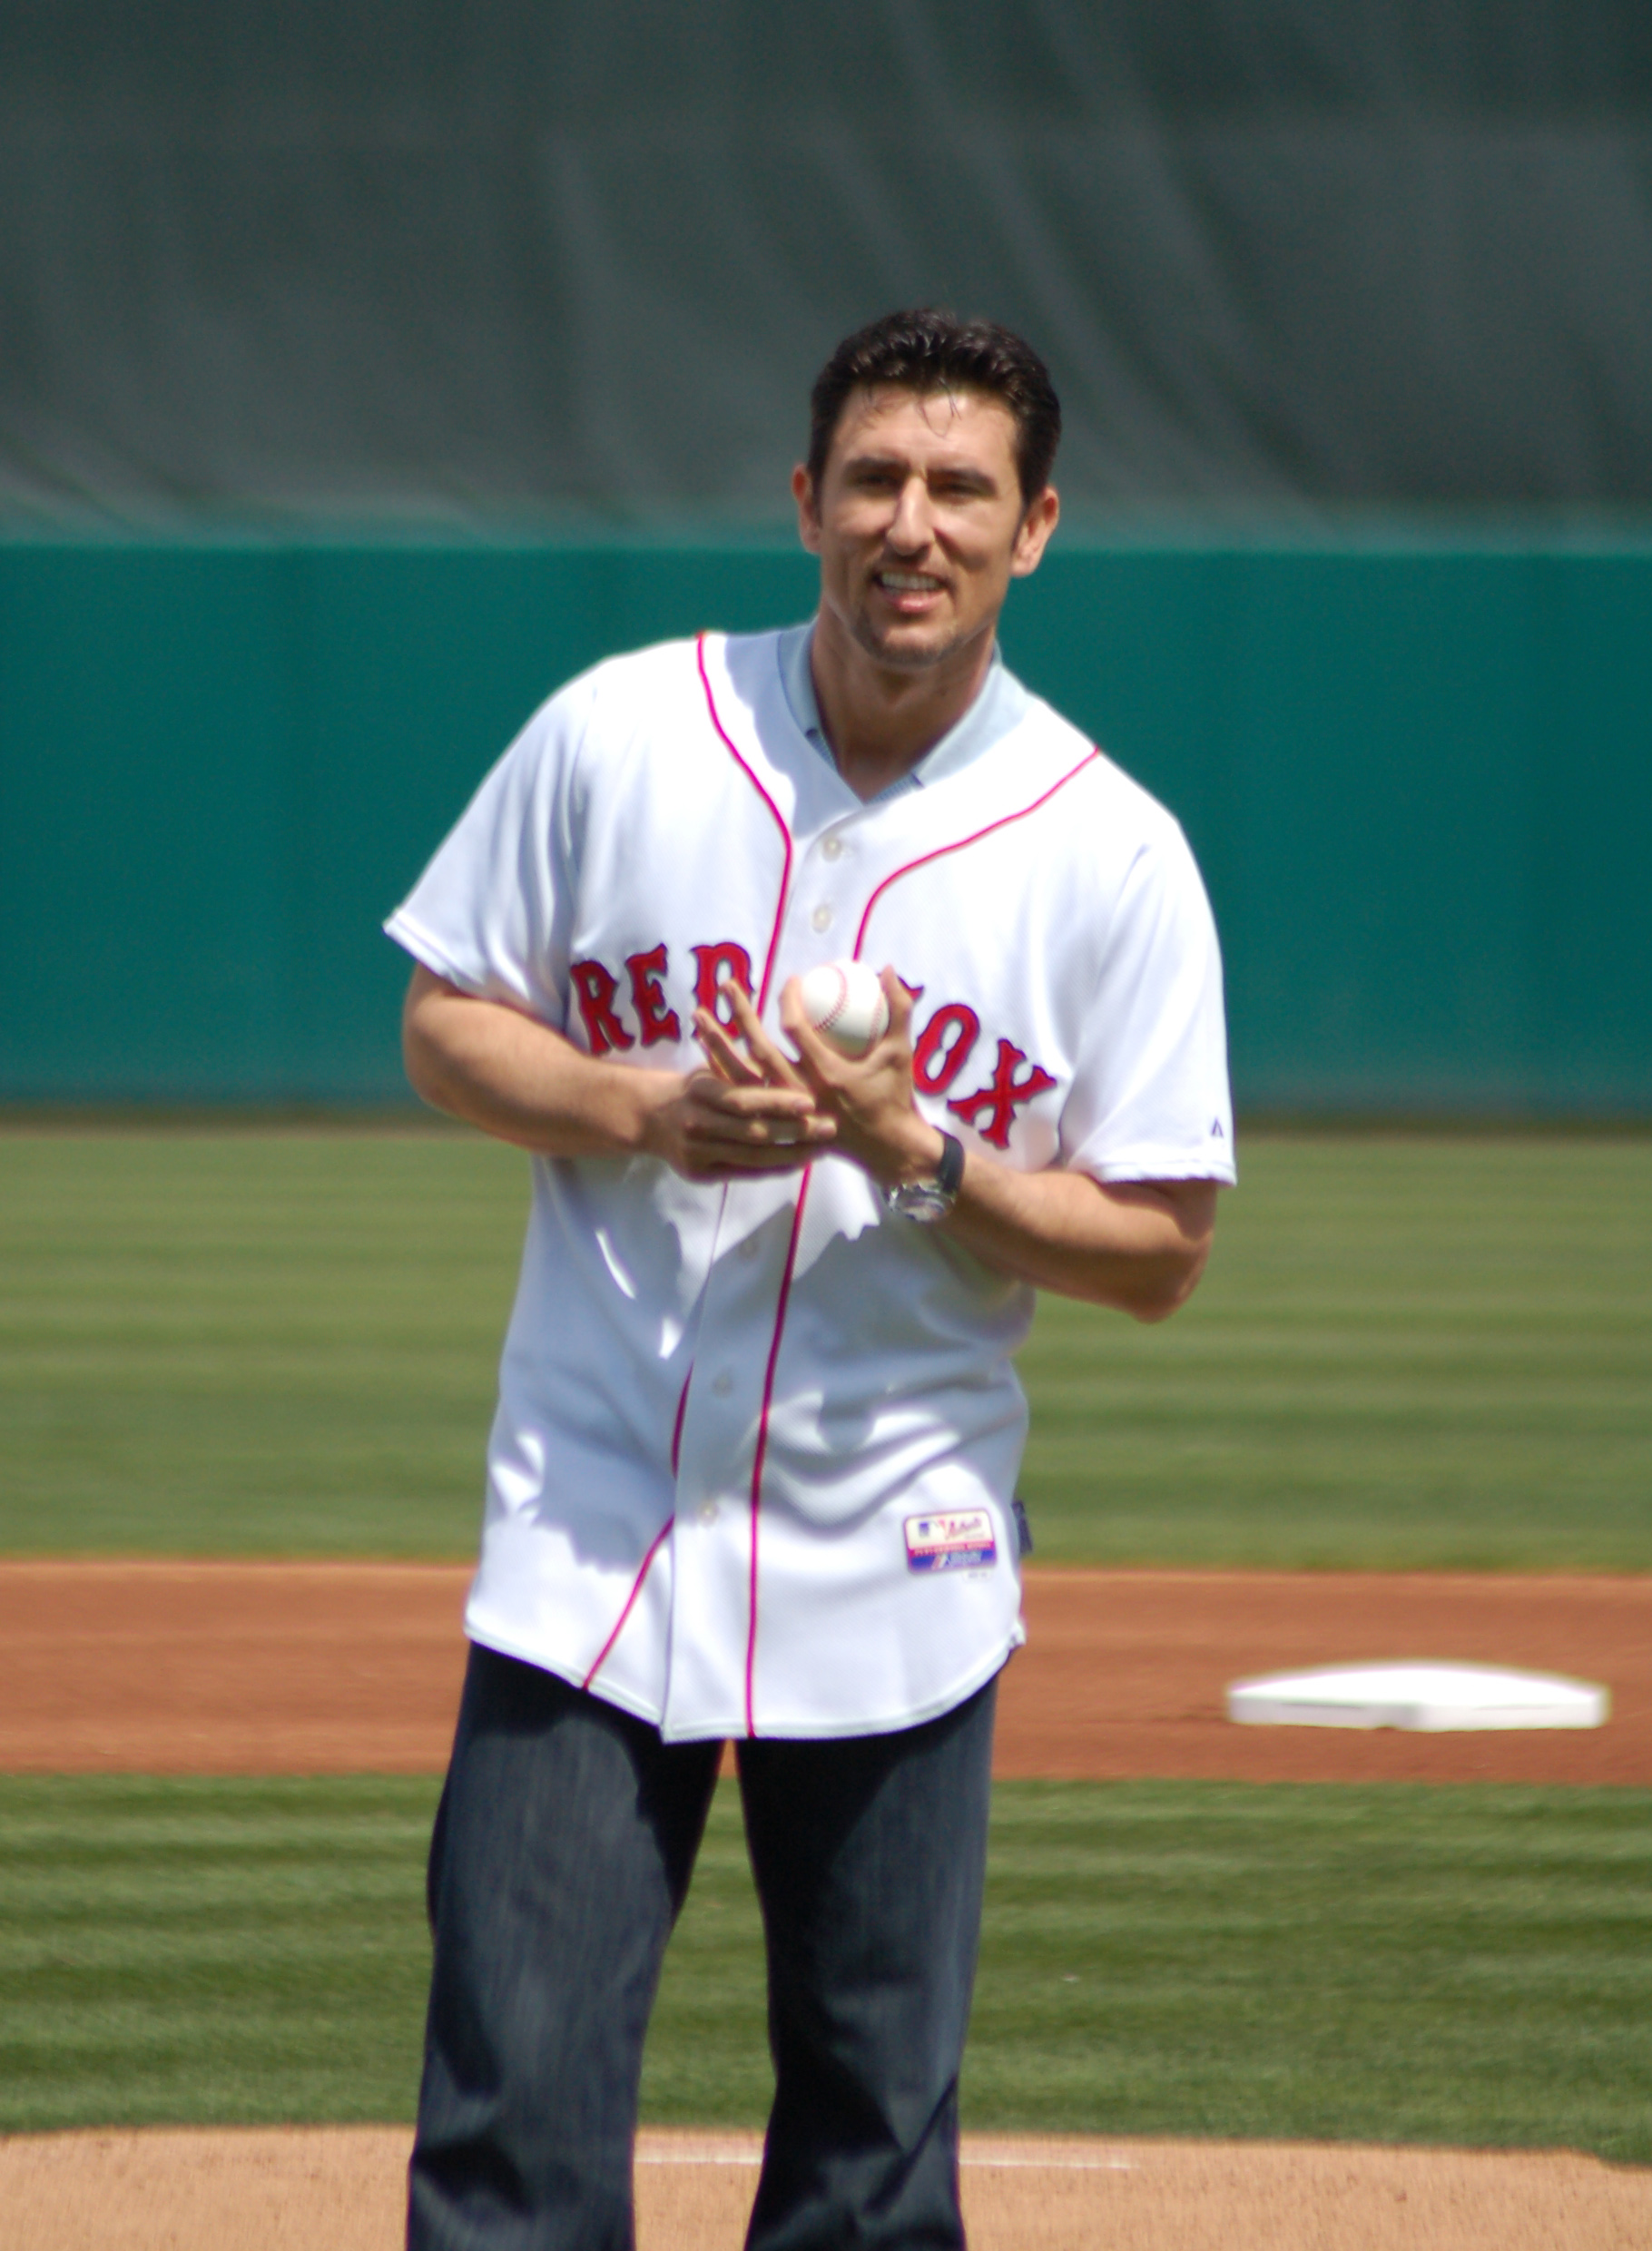 Cursed To First - Sox and Pats forever.: Nomar Garciaparra